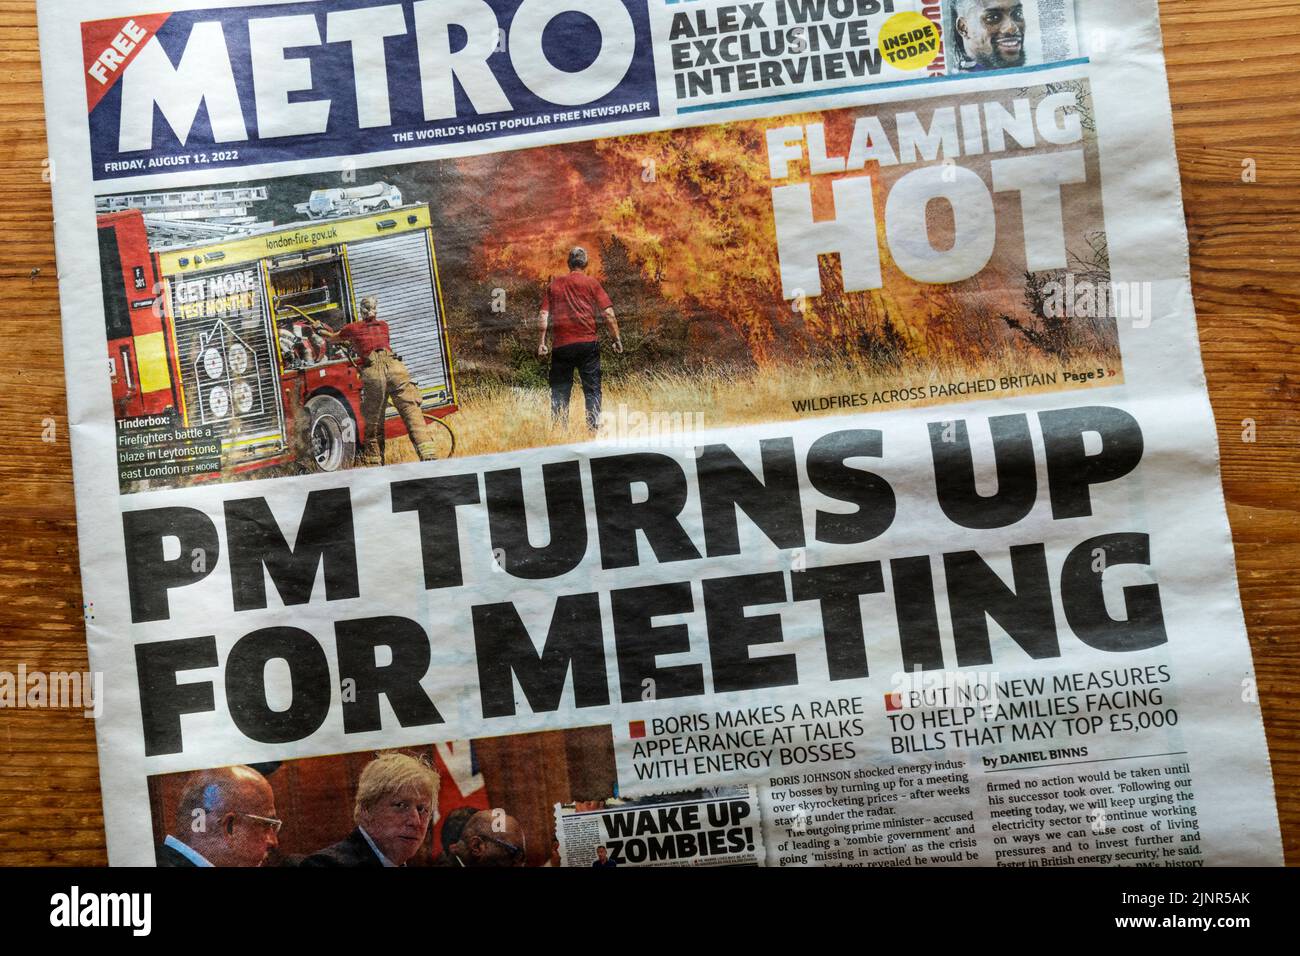 12 August 2022 front page headline in Metro newspaper reads PM turns up for meeting. Refers to perceived lack of action from Boris Johnson following his agreement to step down as Prime Minister. Stock Photo